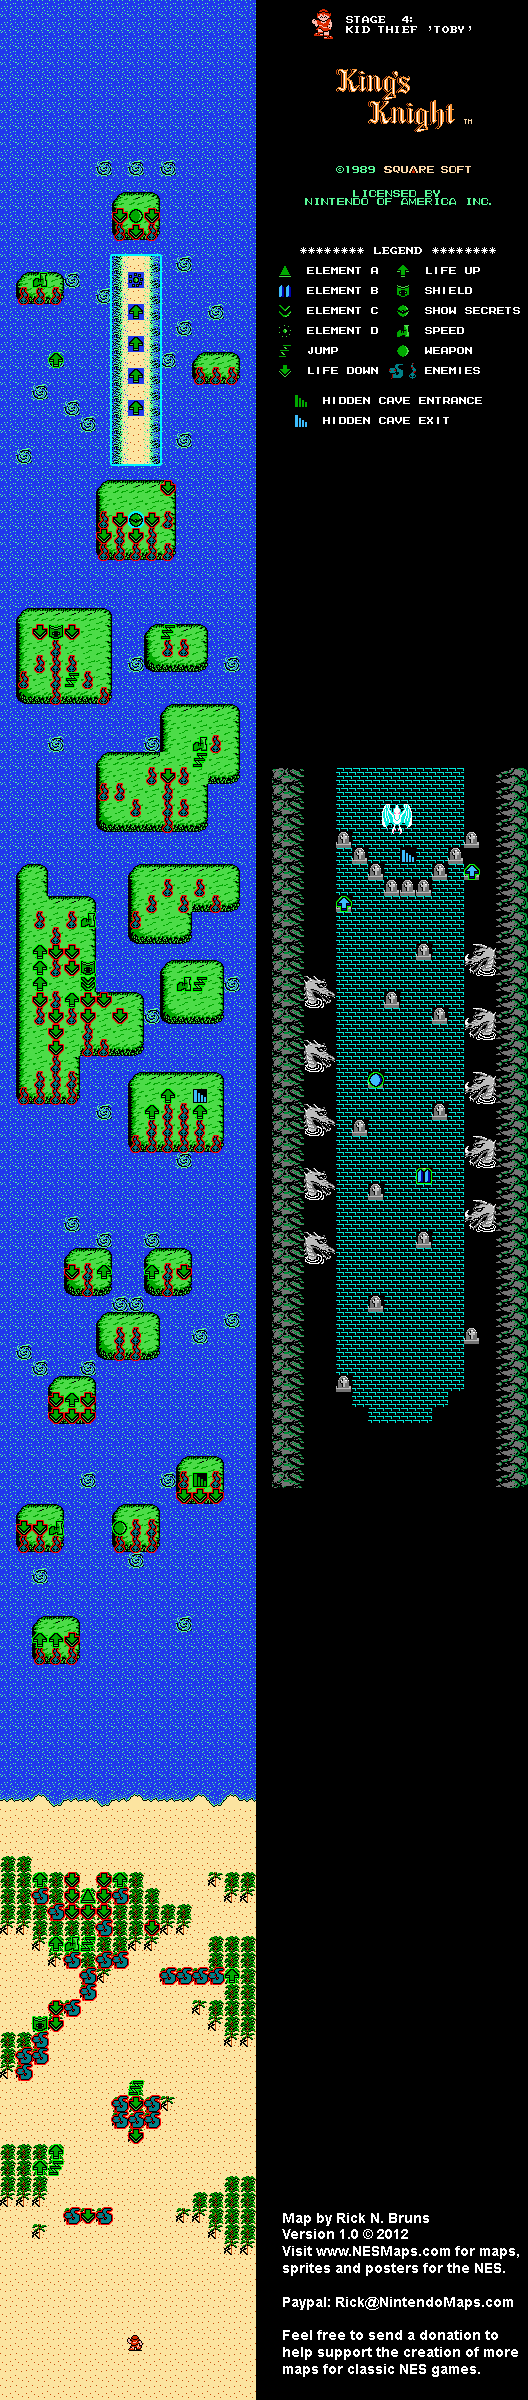 King's Knight - Stage 4 - Nintendo NES Map